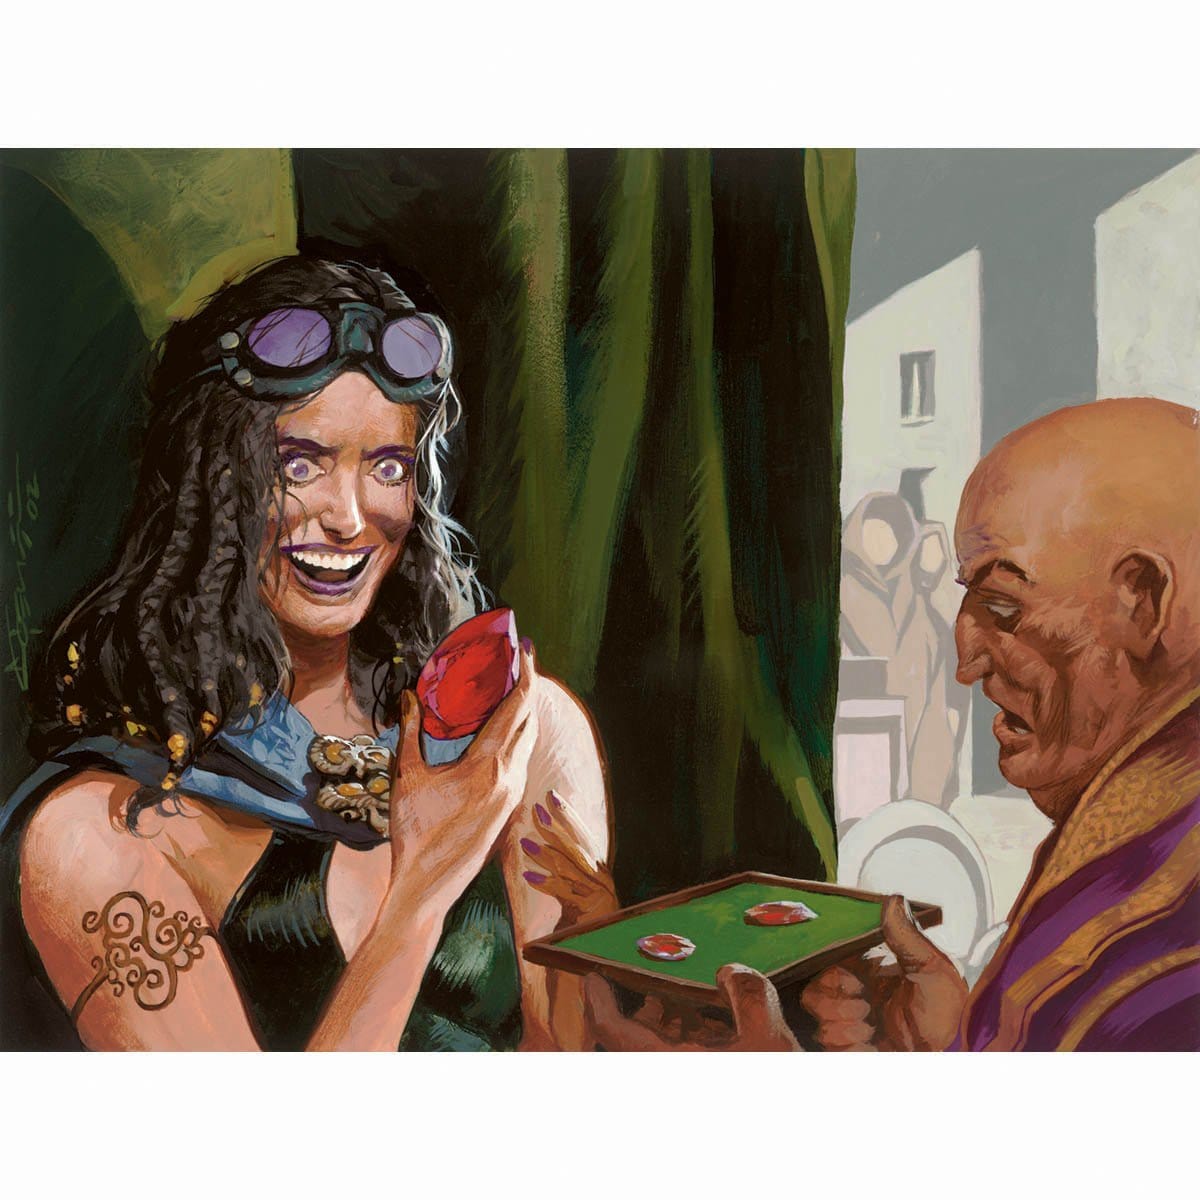 Blackmail Print - Print - Original Magic Art - Accessories for Magic the Gathering and other card games